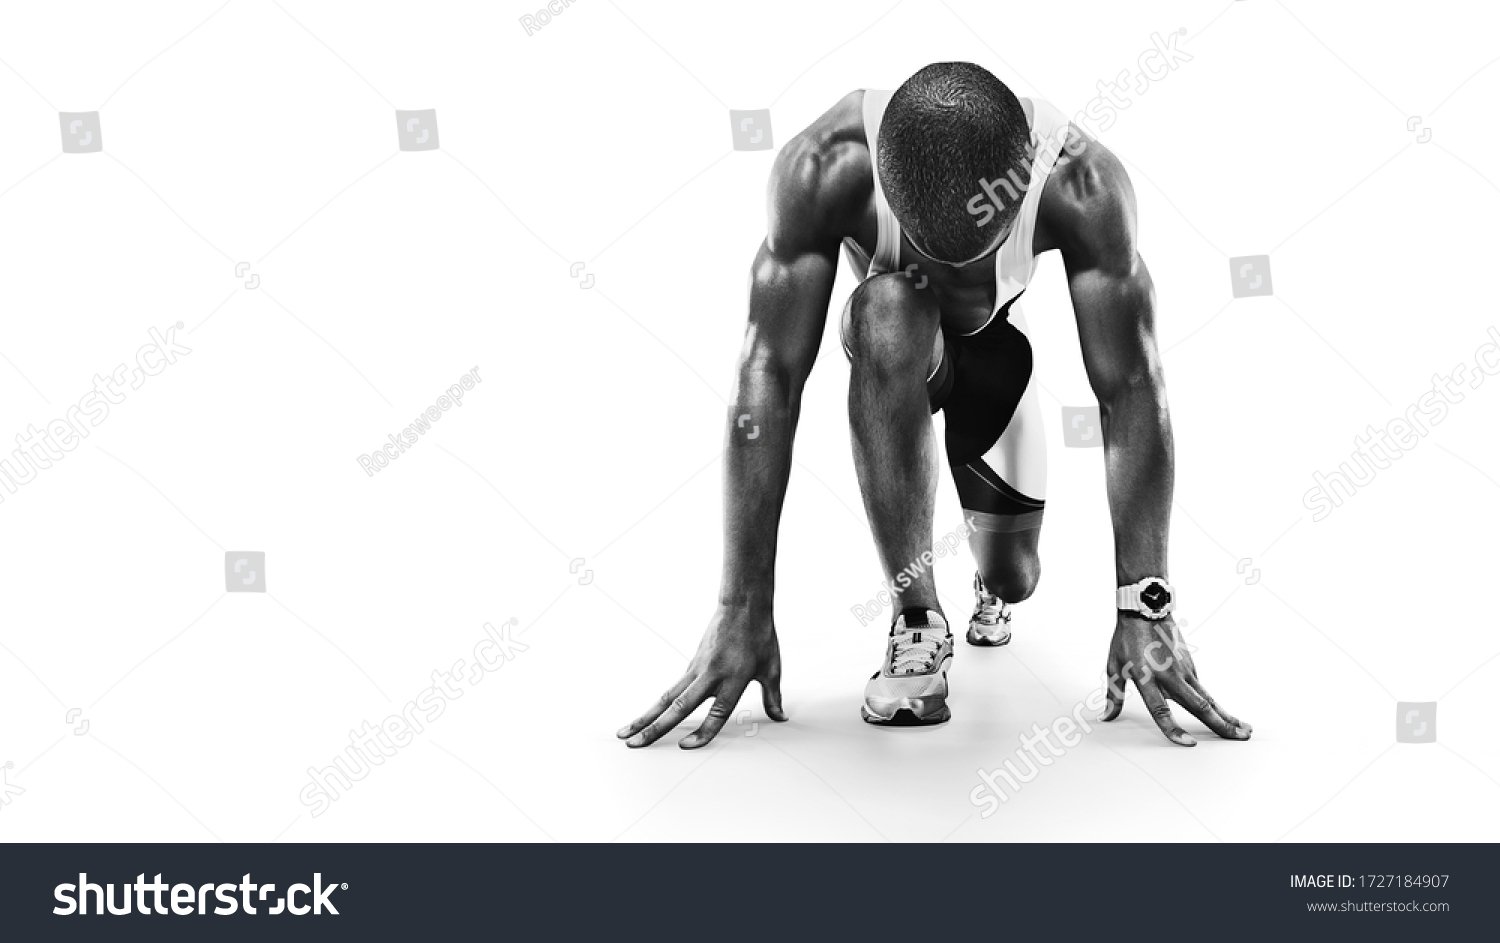 Sports background. Runner on the start. Black and white image isolated on white.  #1727184907